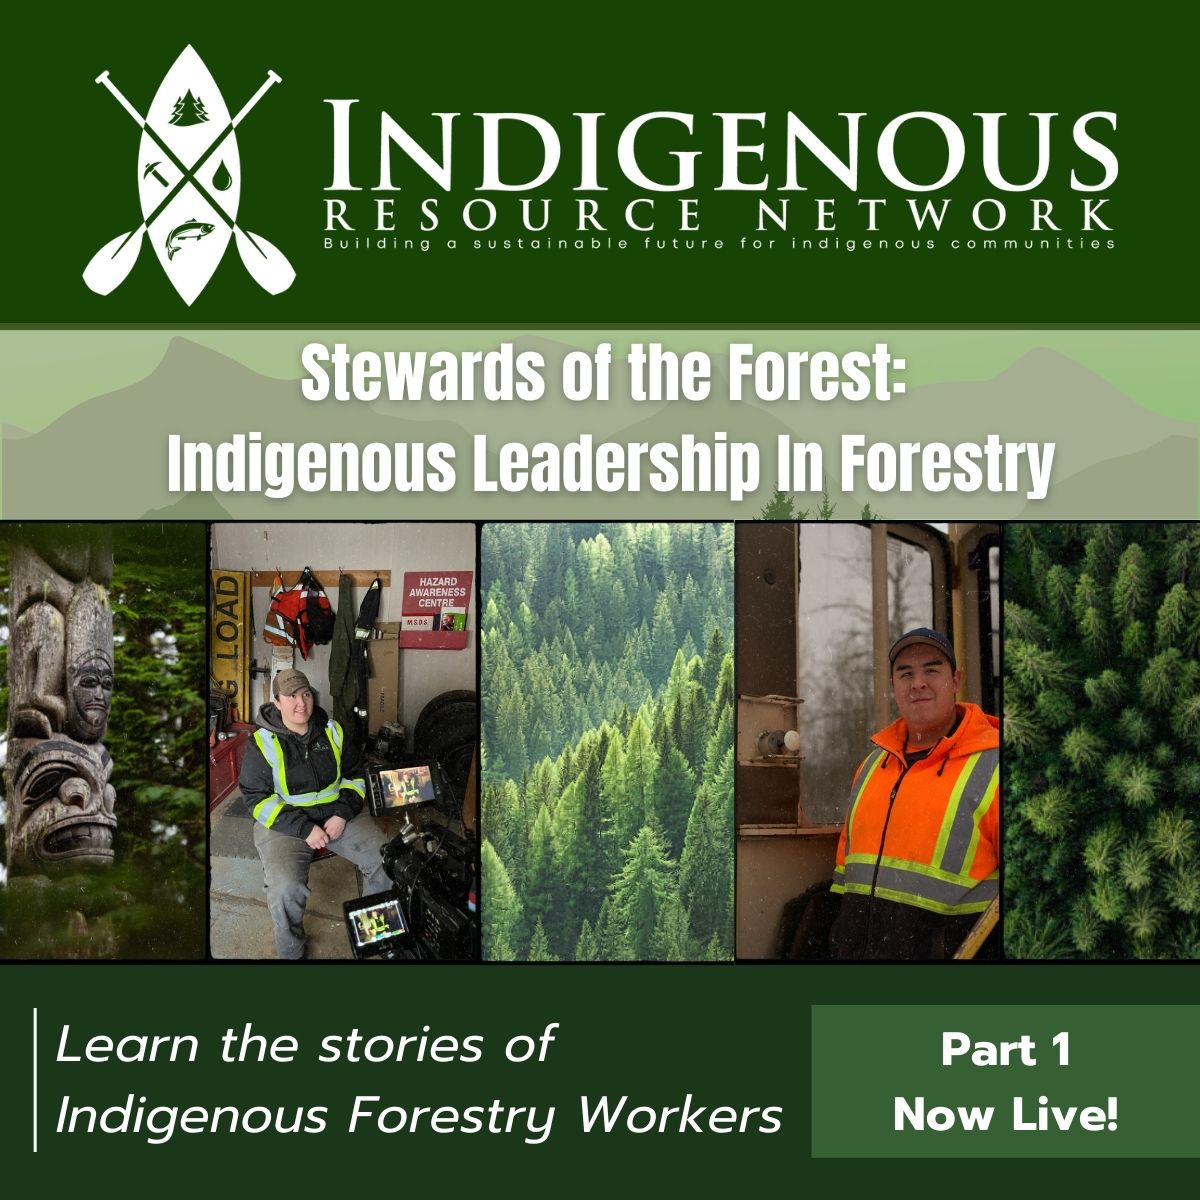 Today is the day – Part 1 of the Stewards of the Forest: Indigenous Leadership in Forestry documentary is now live! Watch it here: youtu.be/tM3Q0UqFVmc?si…